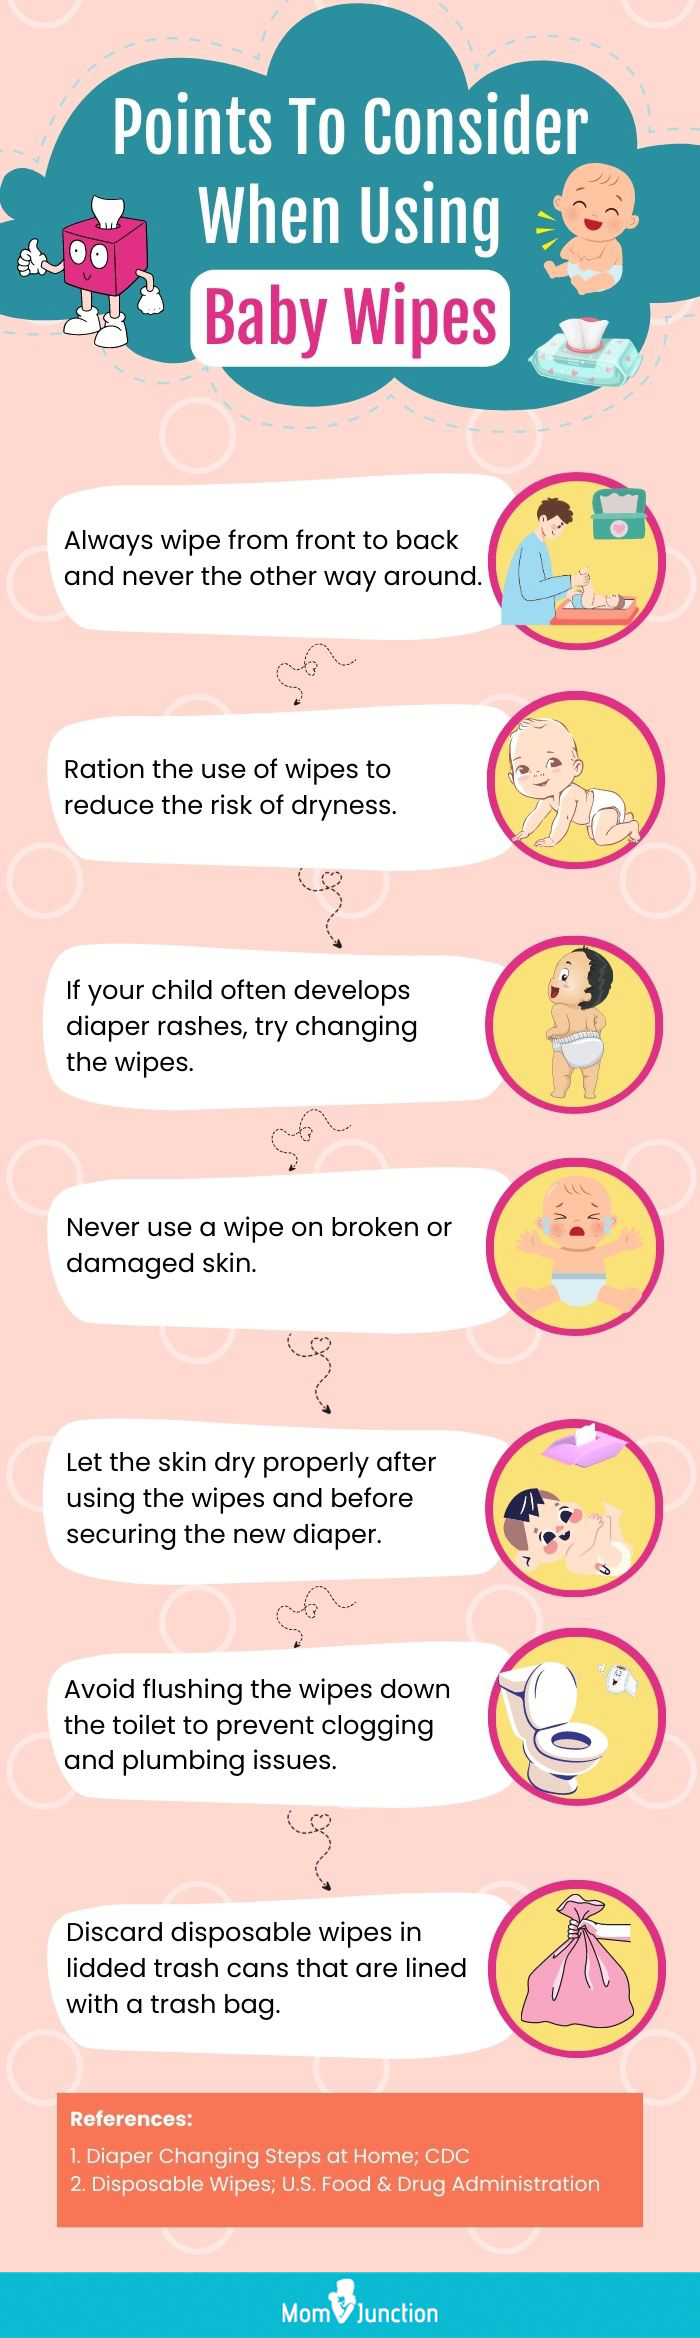 https://www.momjunction.com/wp-content/uploads/2023/02/Points-To-Consider-When-Using-Baby-Wipes.jpg